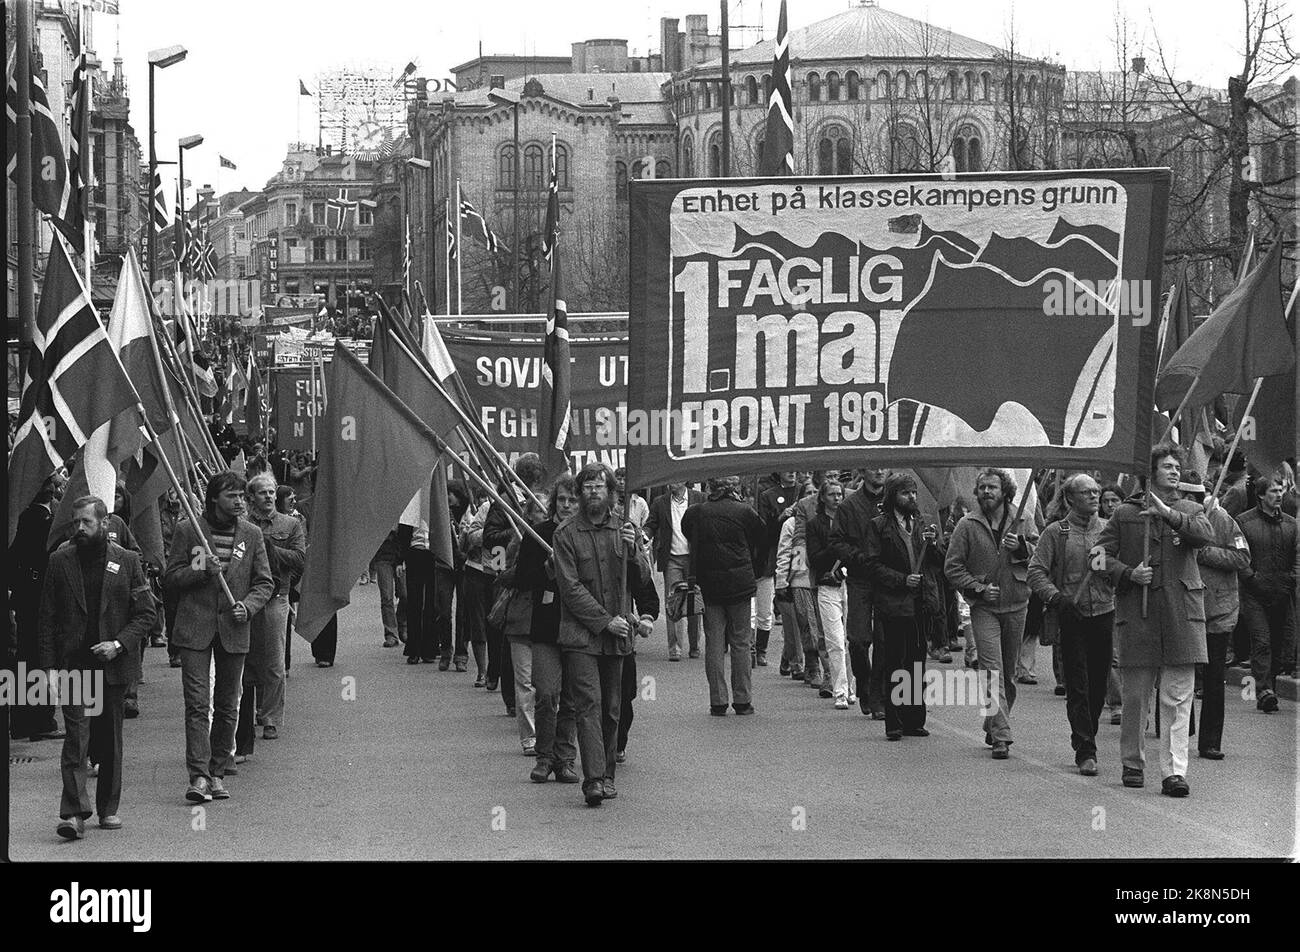 Oslo. Demonstration trains - with good support and marked political opinions - for supporters of AKP (m -l) were often the best way to get their views promoted. Here from May 1, 1981 at the end of the party's glossy period. Professional 1st Maifront 1981. NTB / NTB Stock Photo